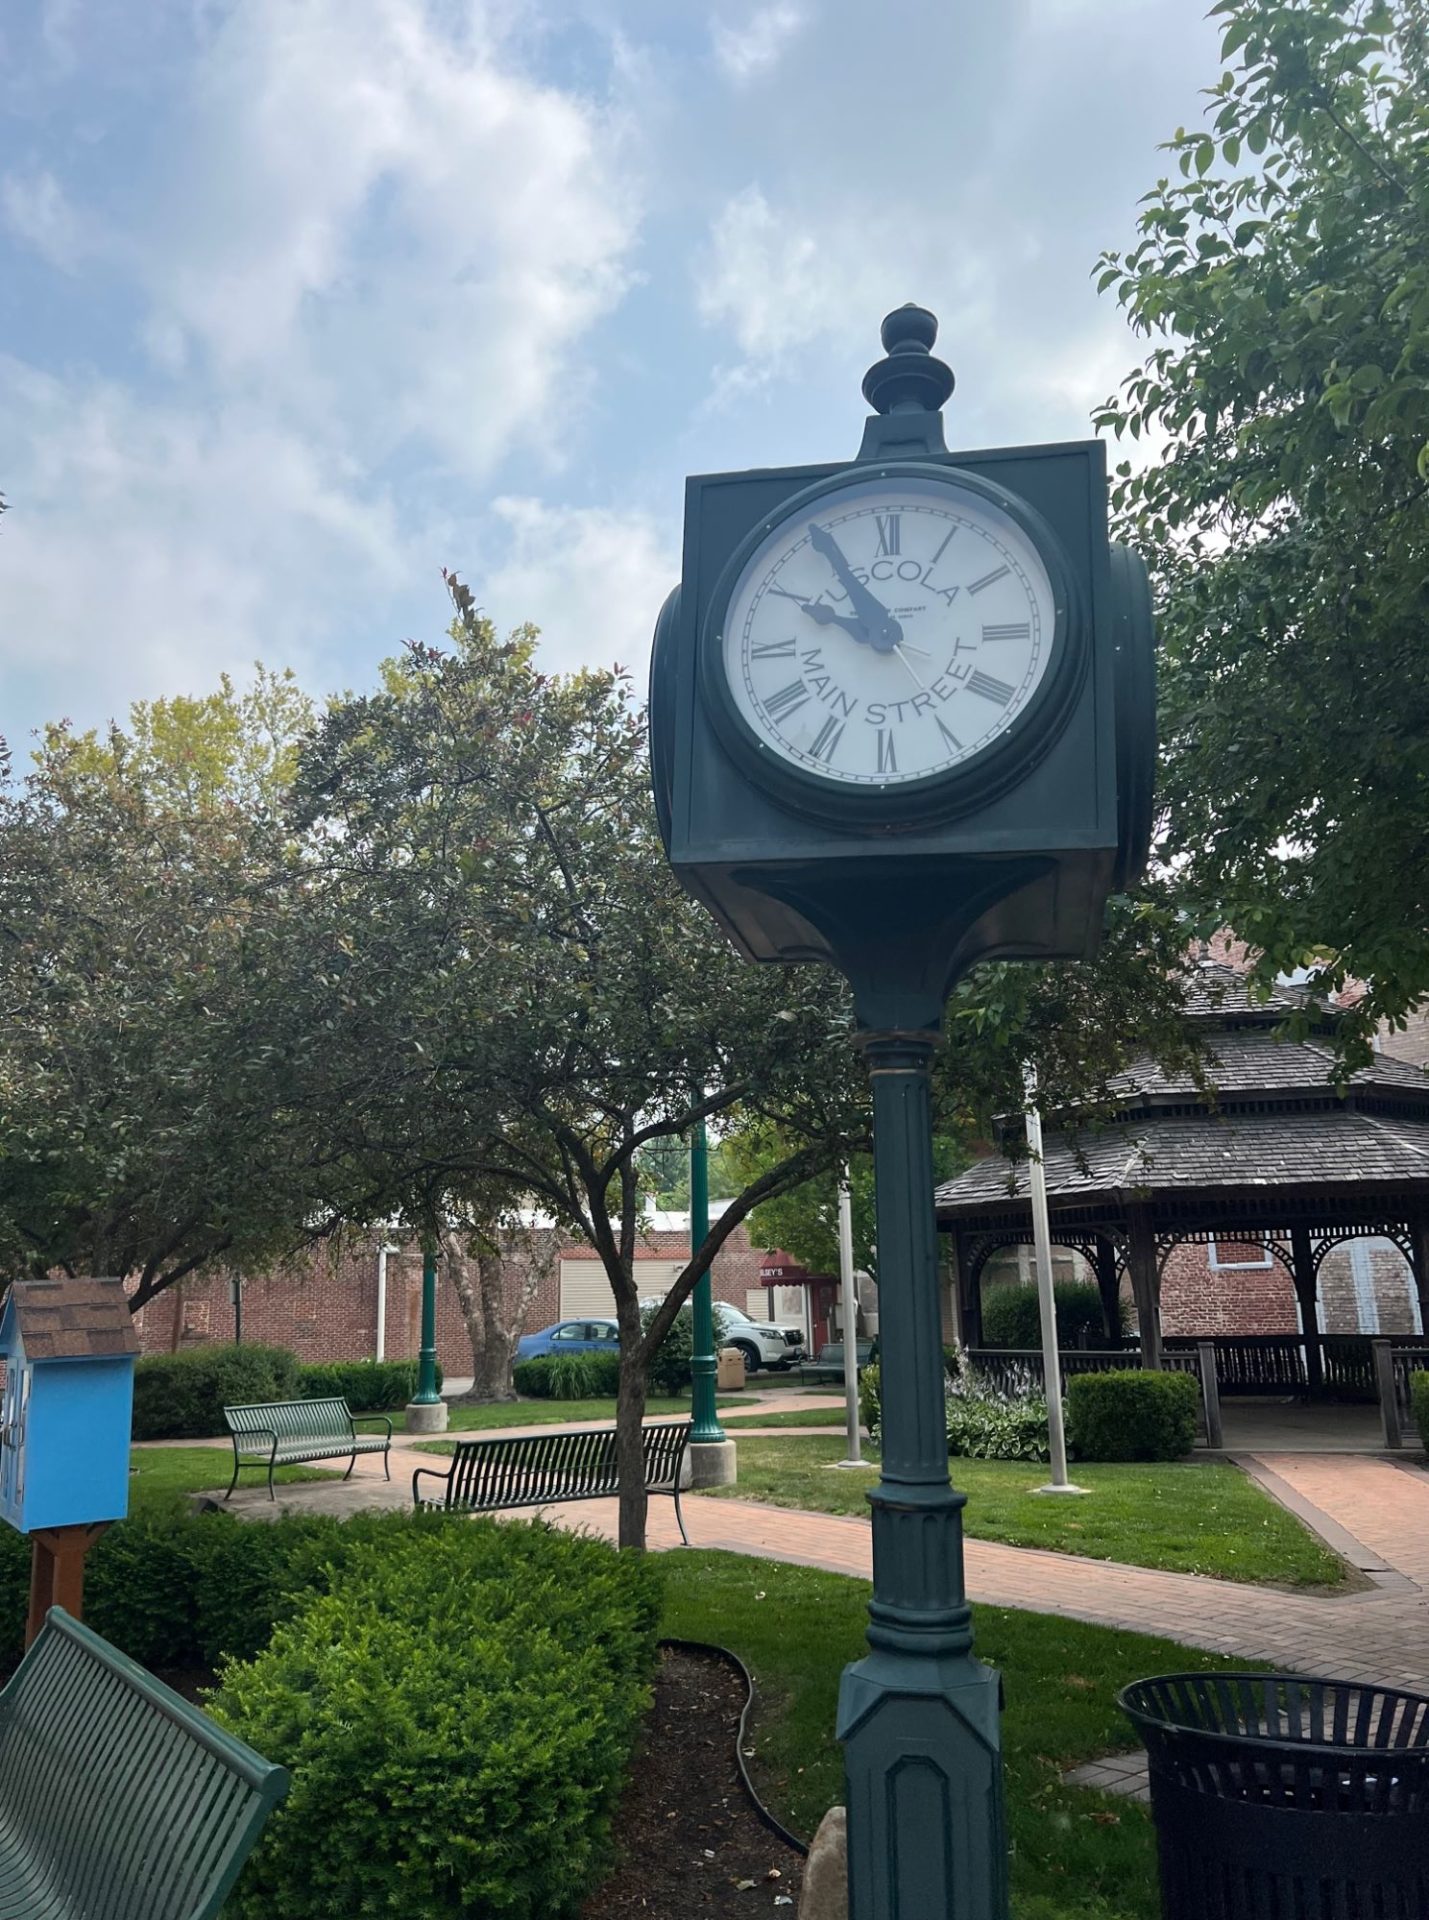 An old-fashioned black post with a white clock face stands at the corner of a plaza with a gazebo and brick sidewalks running through it.